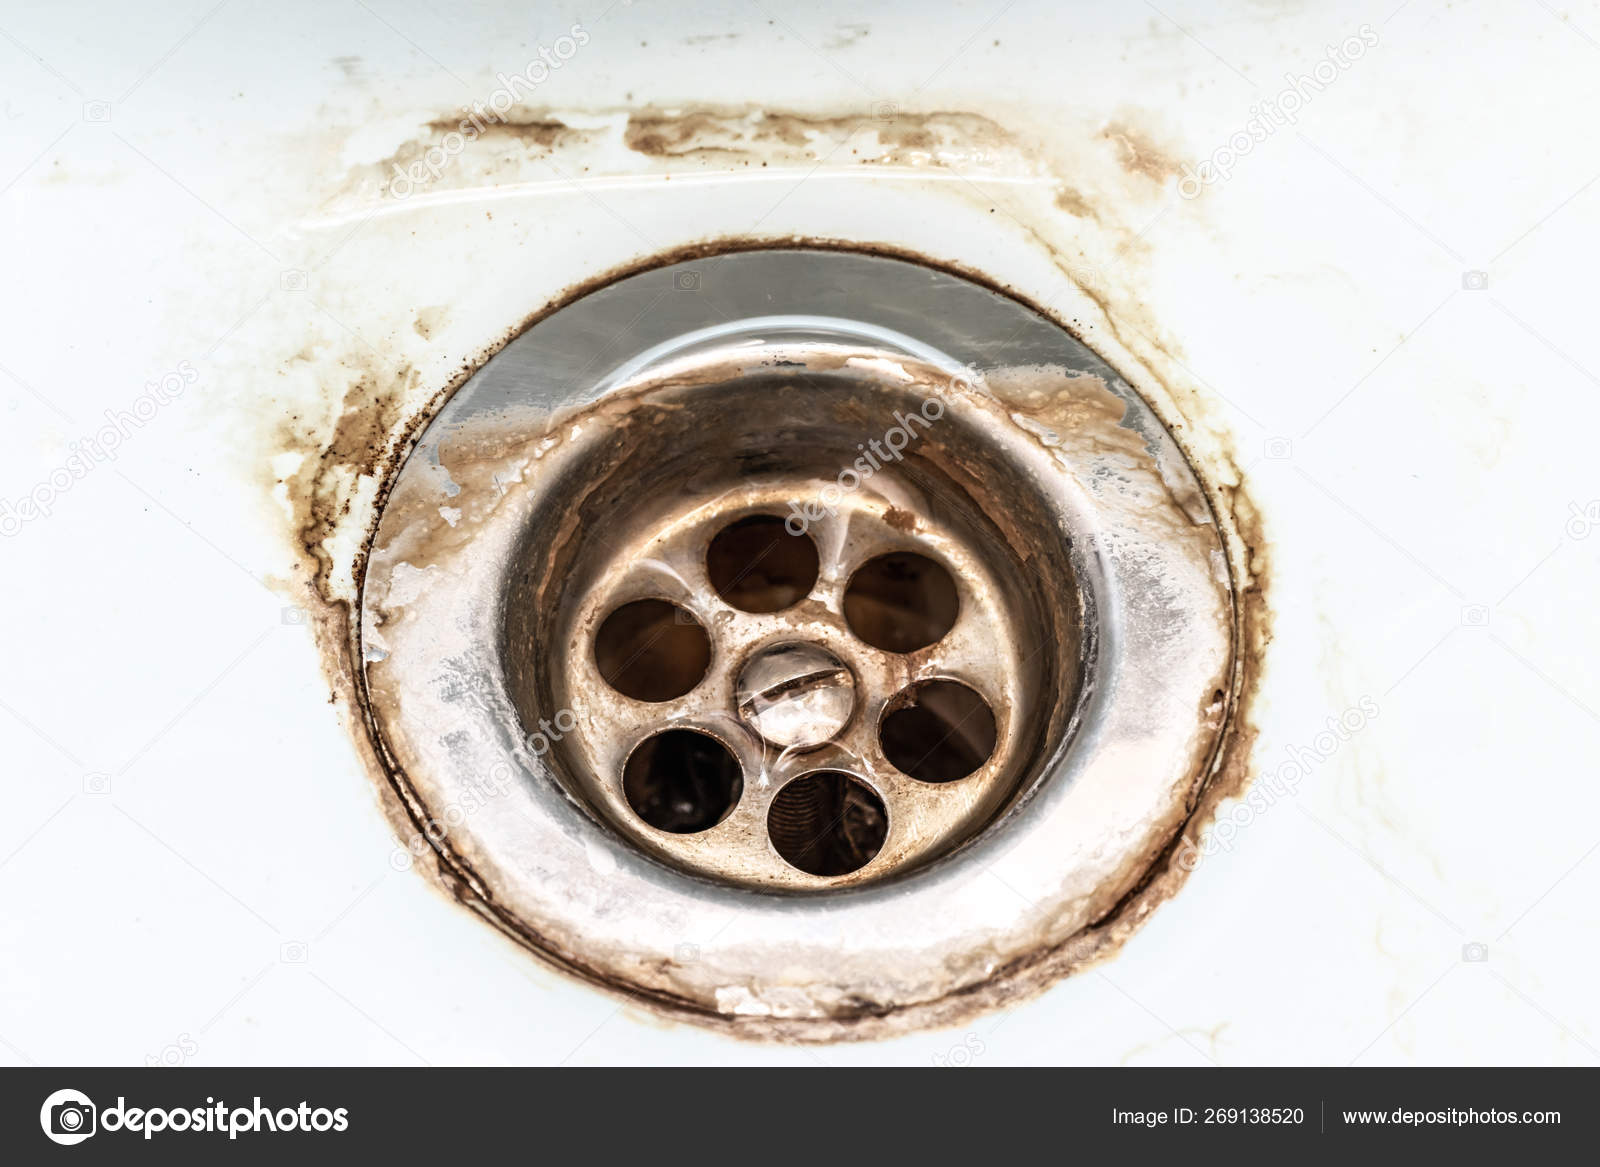 Dirty Sink Drain Mesh Hole With Limescale Or Lime Scale And